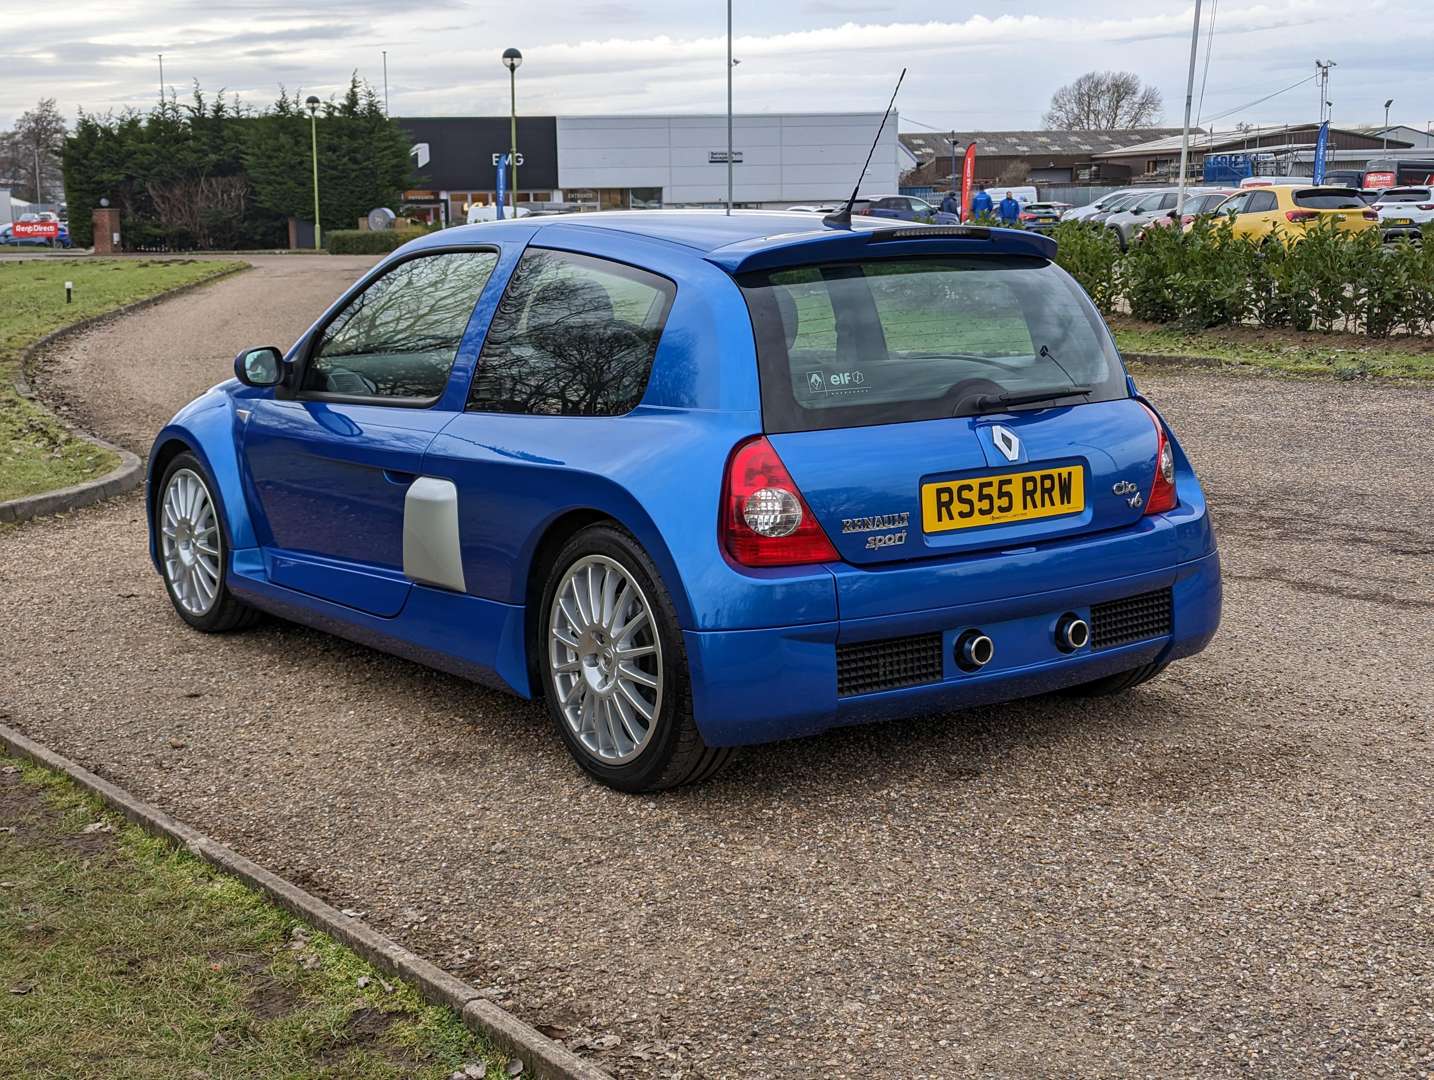 2003 RENAULT CLIO V6 PHASE 2 for sale by auction in Belfast, Northern  Ireland, United Kingdom